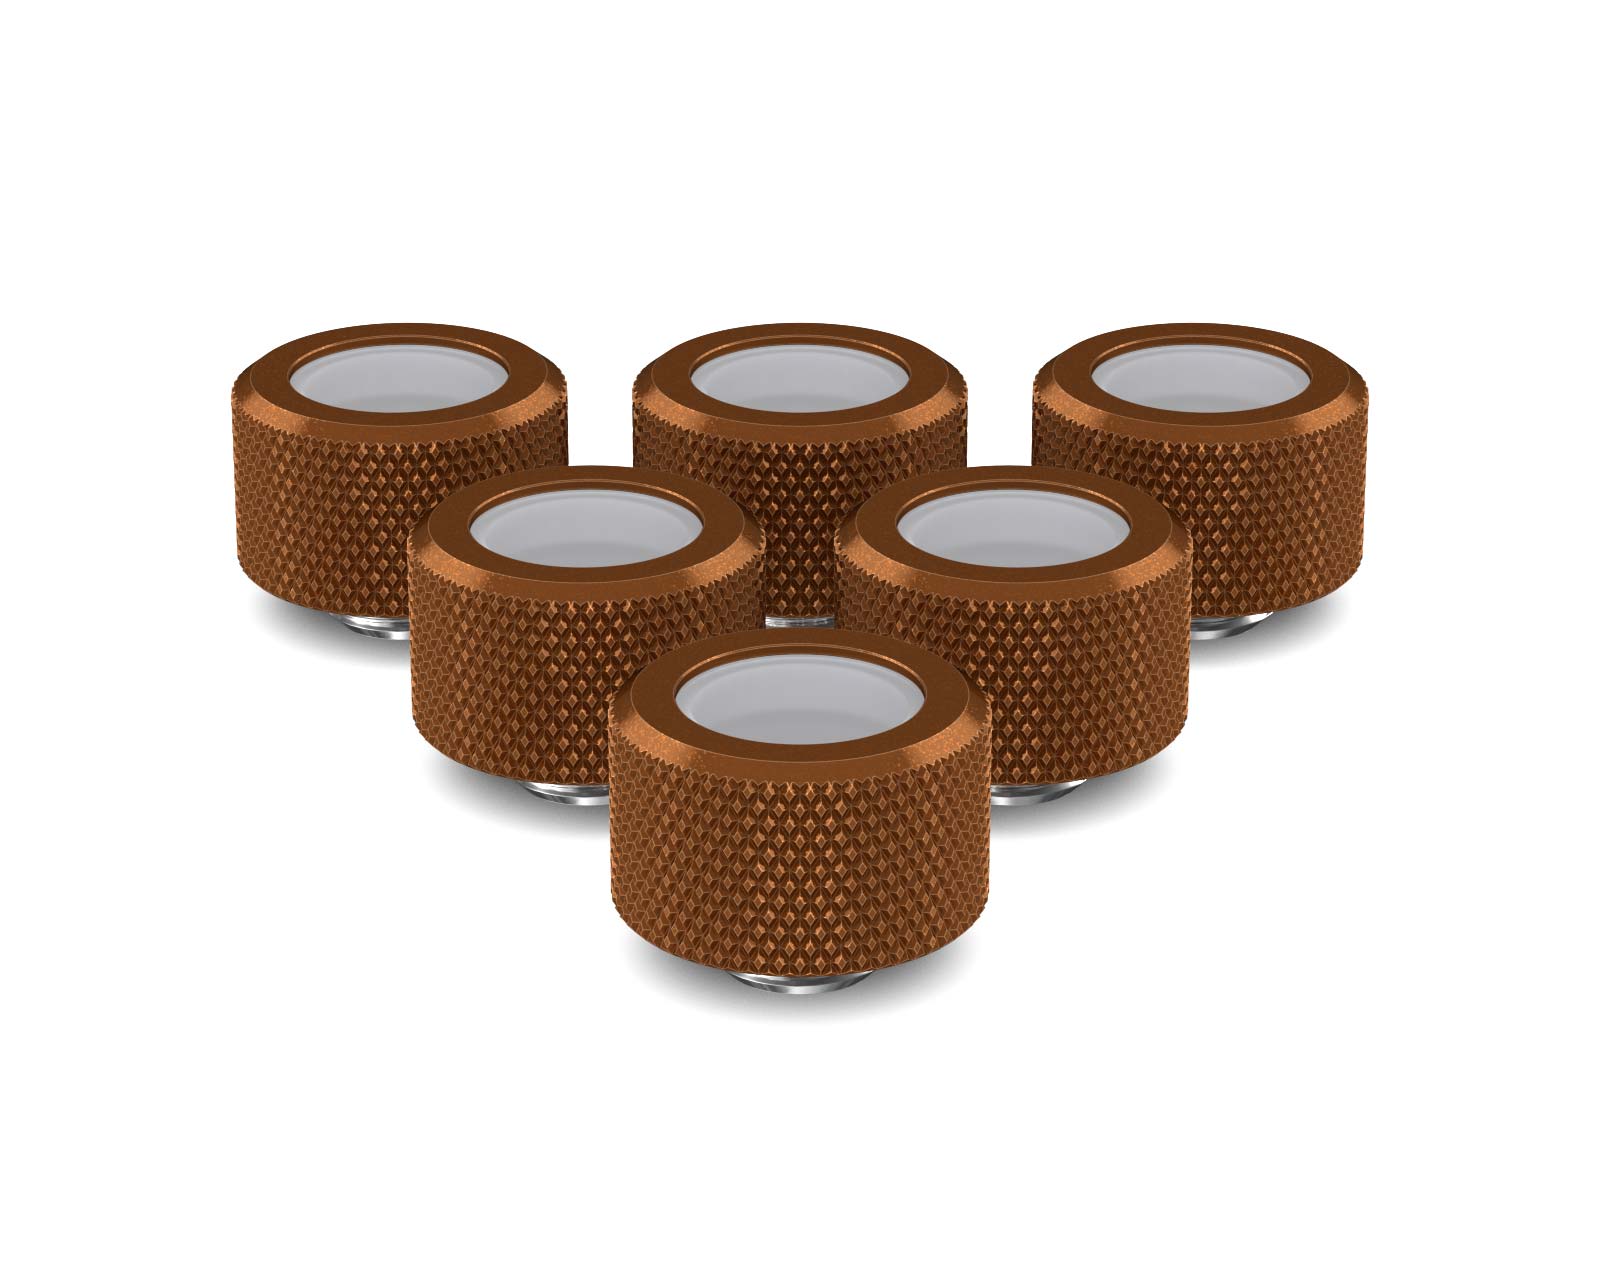 PrimoChill 16mm OD Rigid SX Fitting - 6 Pack - PrimoChill - KEEPING IT COOL Copper